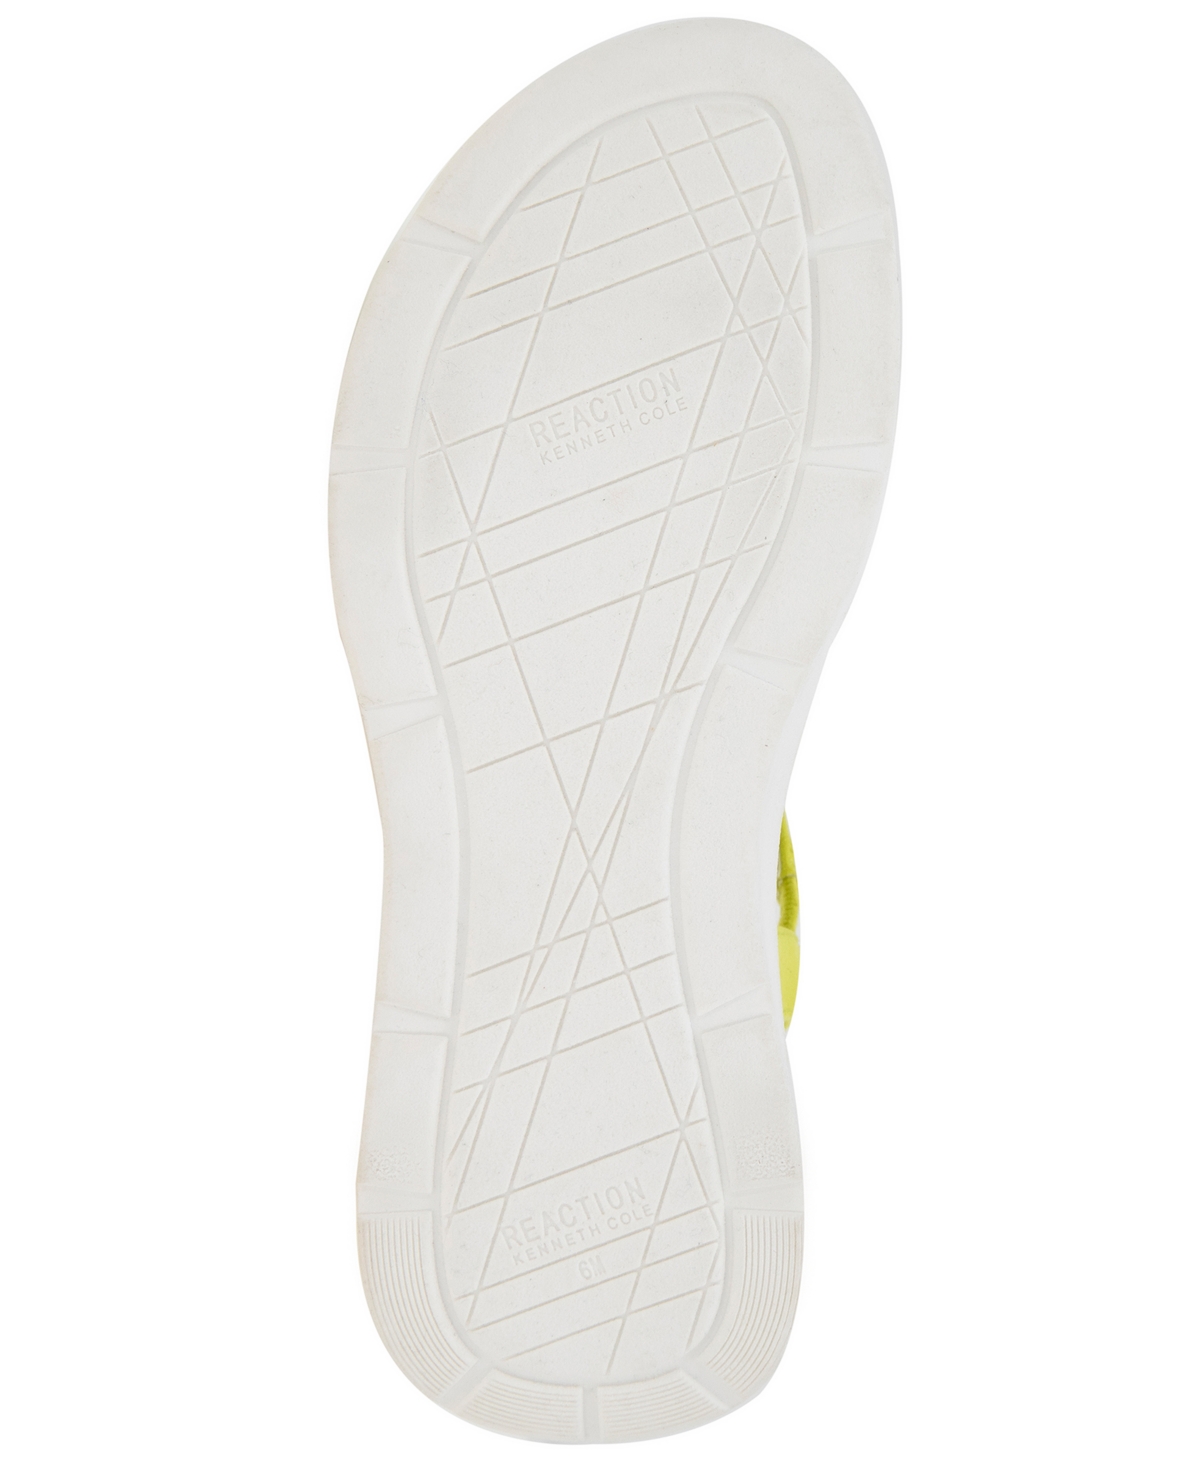 Shop Kenneth Cole Reaction Women's Hera Sandals In White Jewel